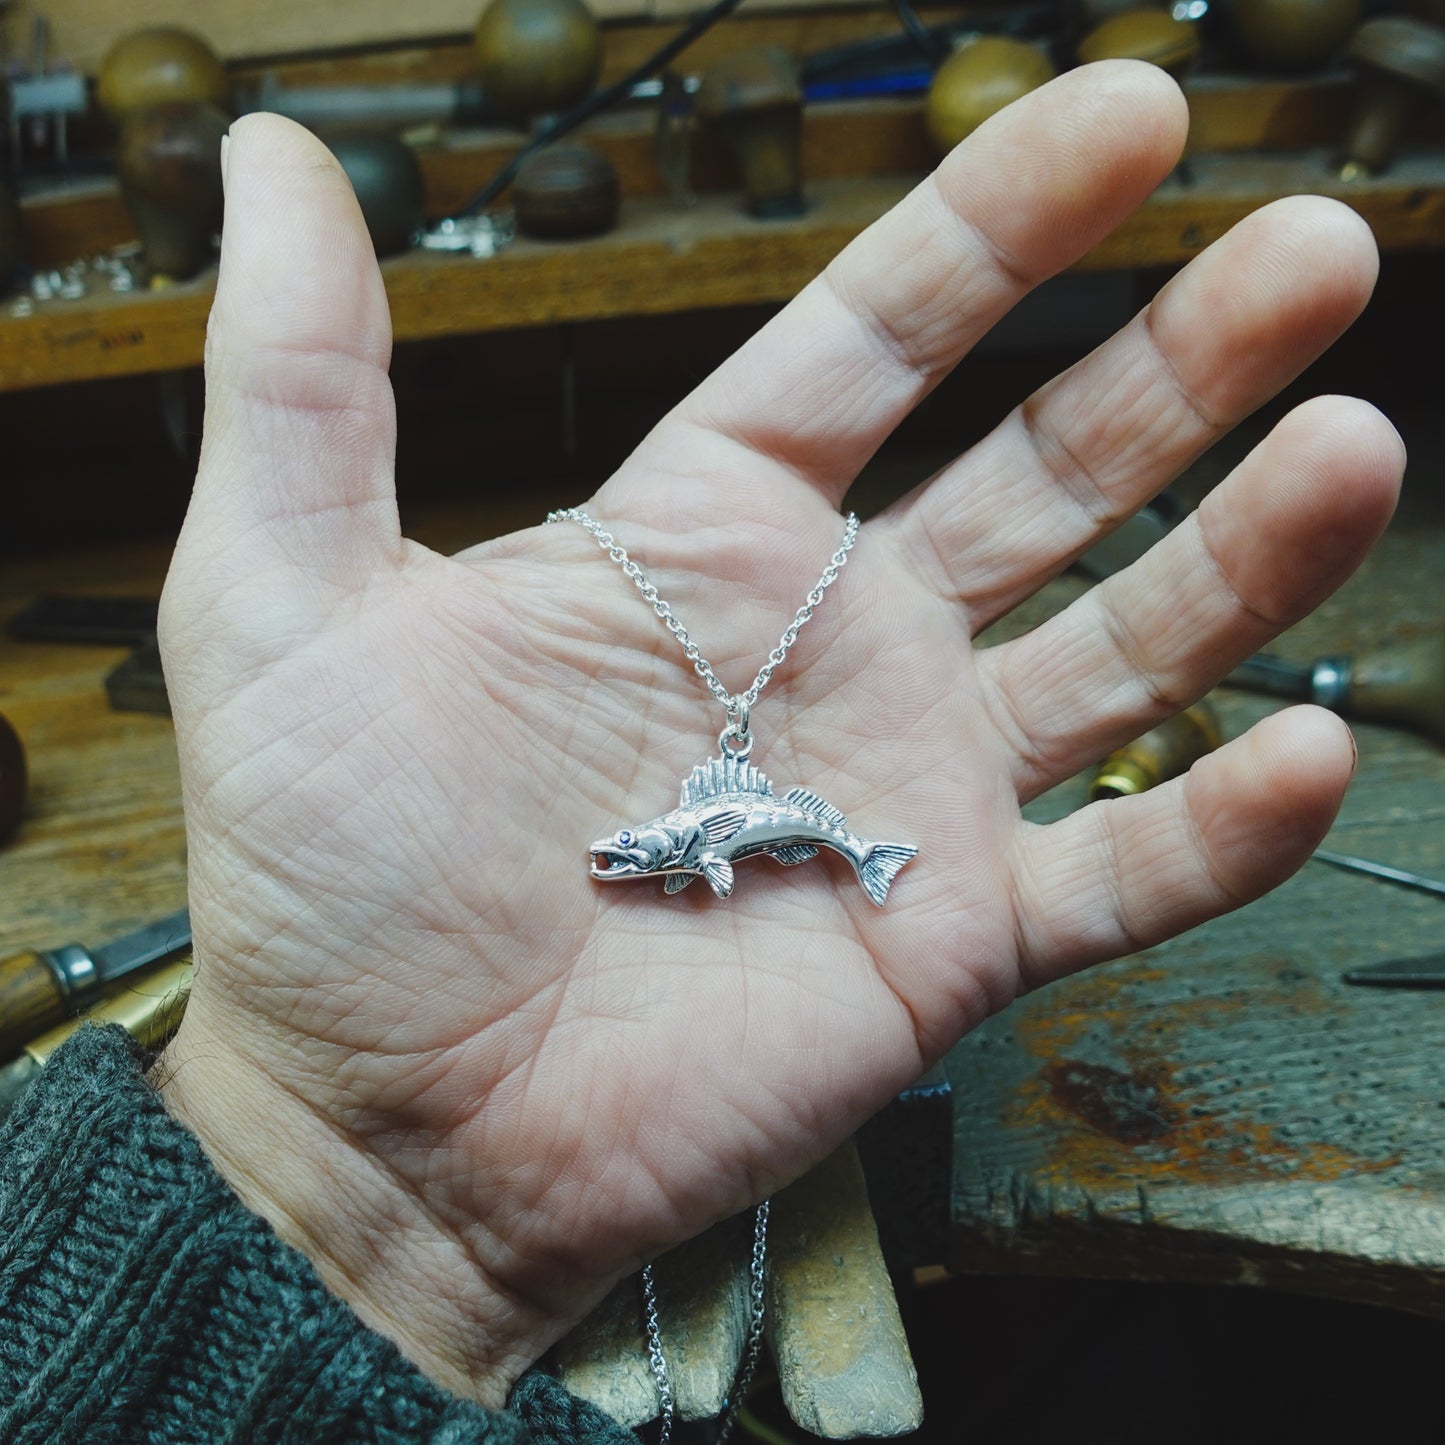 Zander fishing necklace. Made from sterling silver with an antiqued finish, set with a gemstone eye. Walleye pendant, ideal fisherman’s angling gift © Adrian Ashley